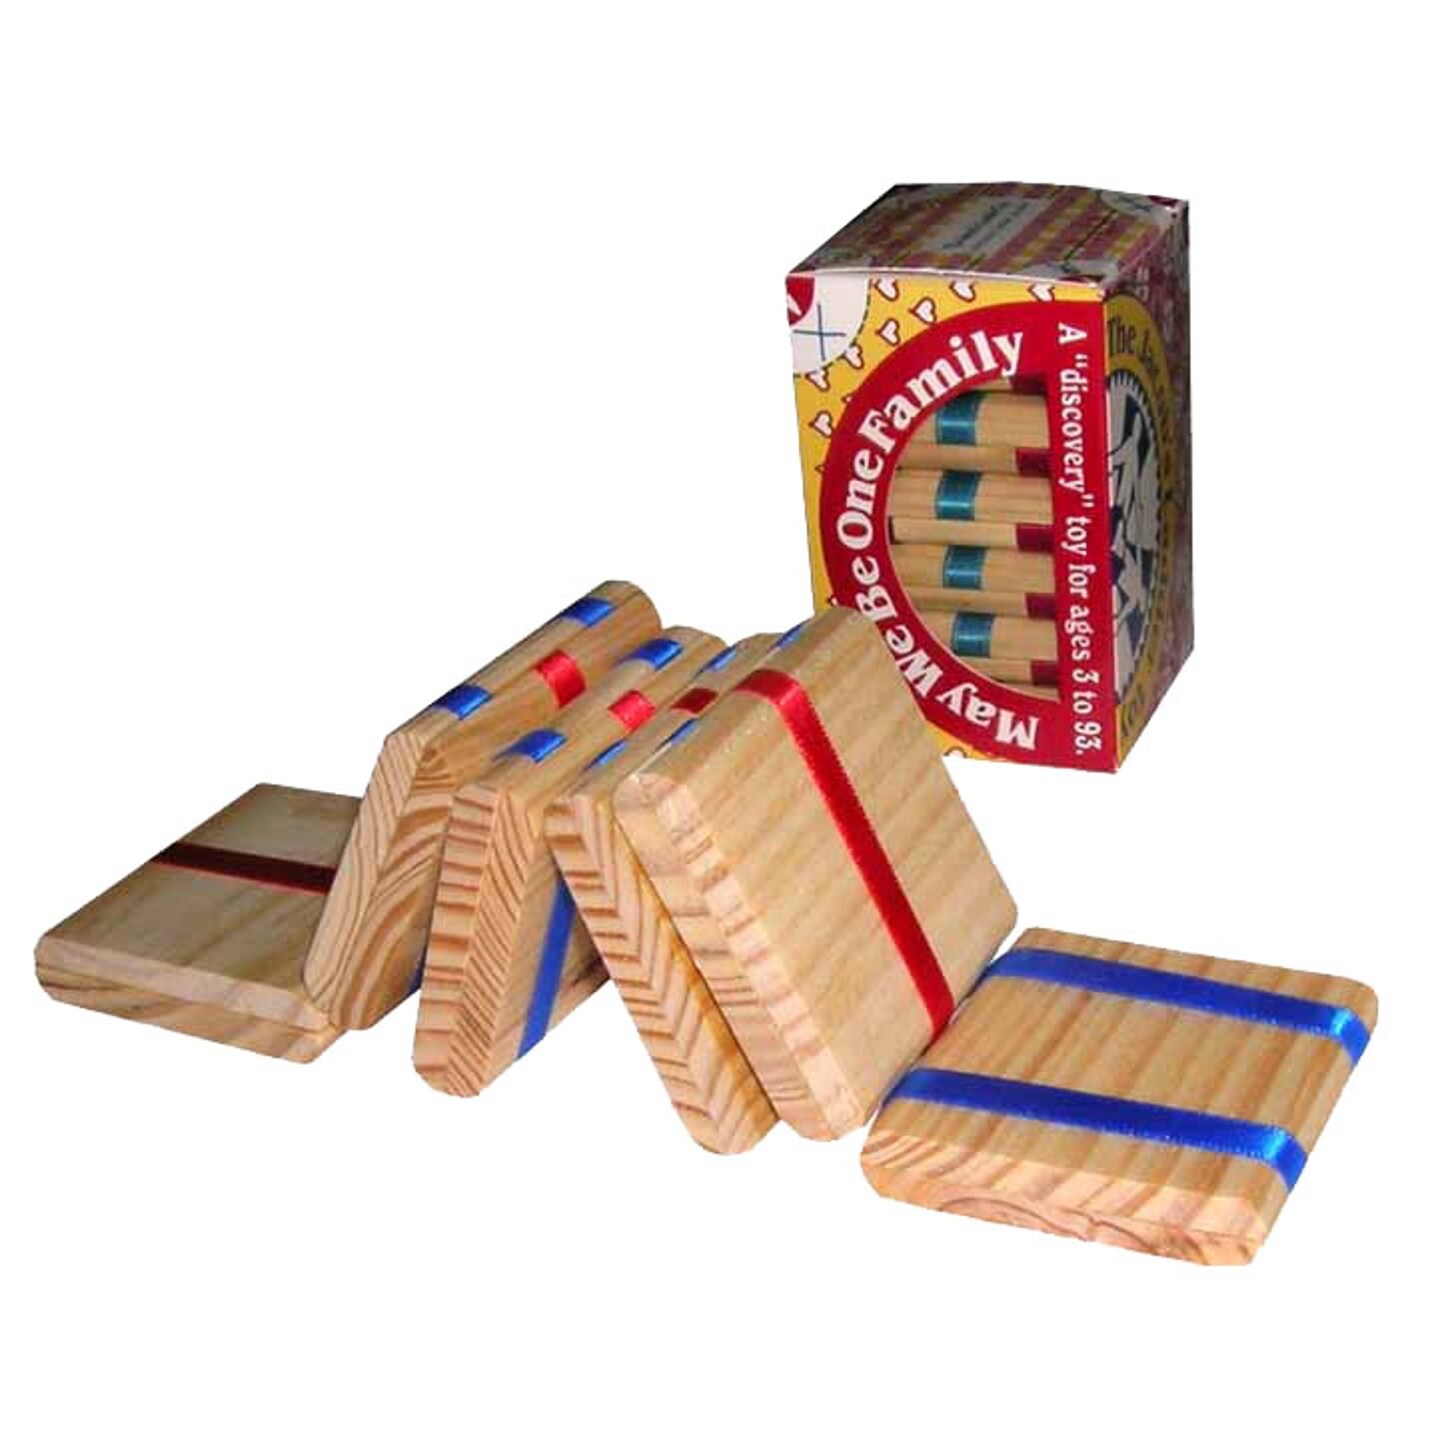 Jacob&#x27;s Ladder Wooden Folk Toy, Retro Fidget, Cascade of Tumbling Blocks with Red, White, and Blue Ribbon, 13.25 inch